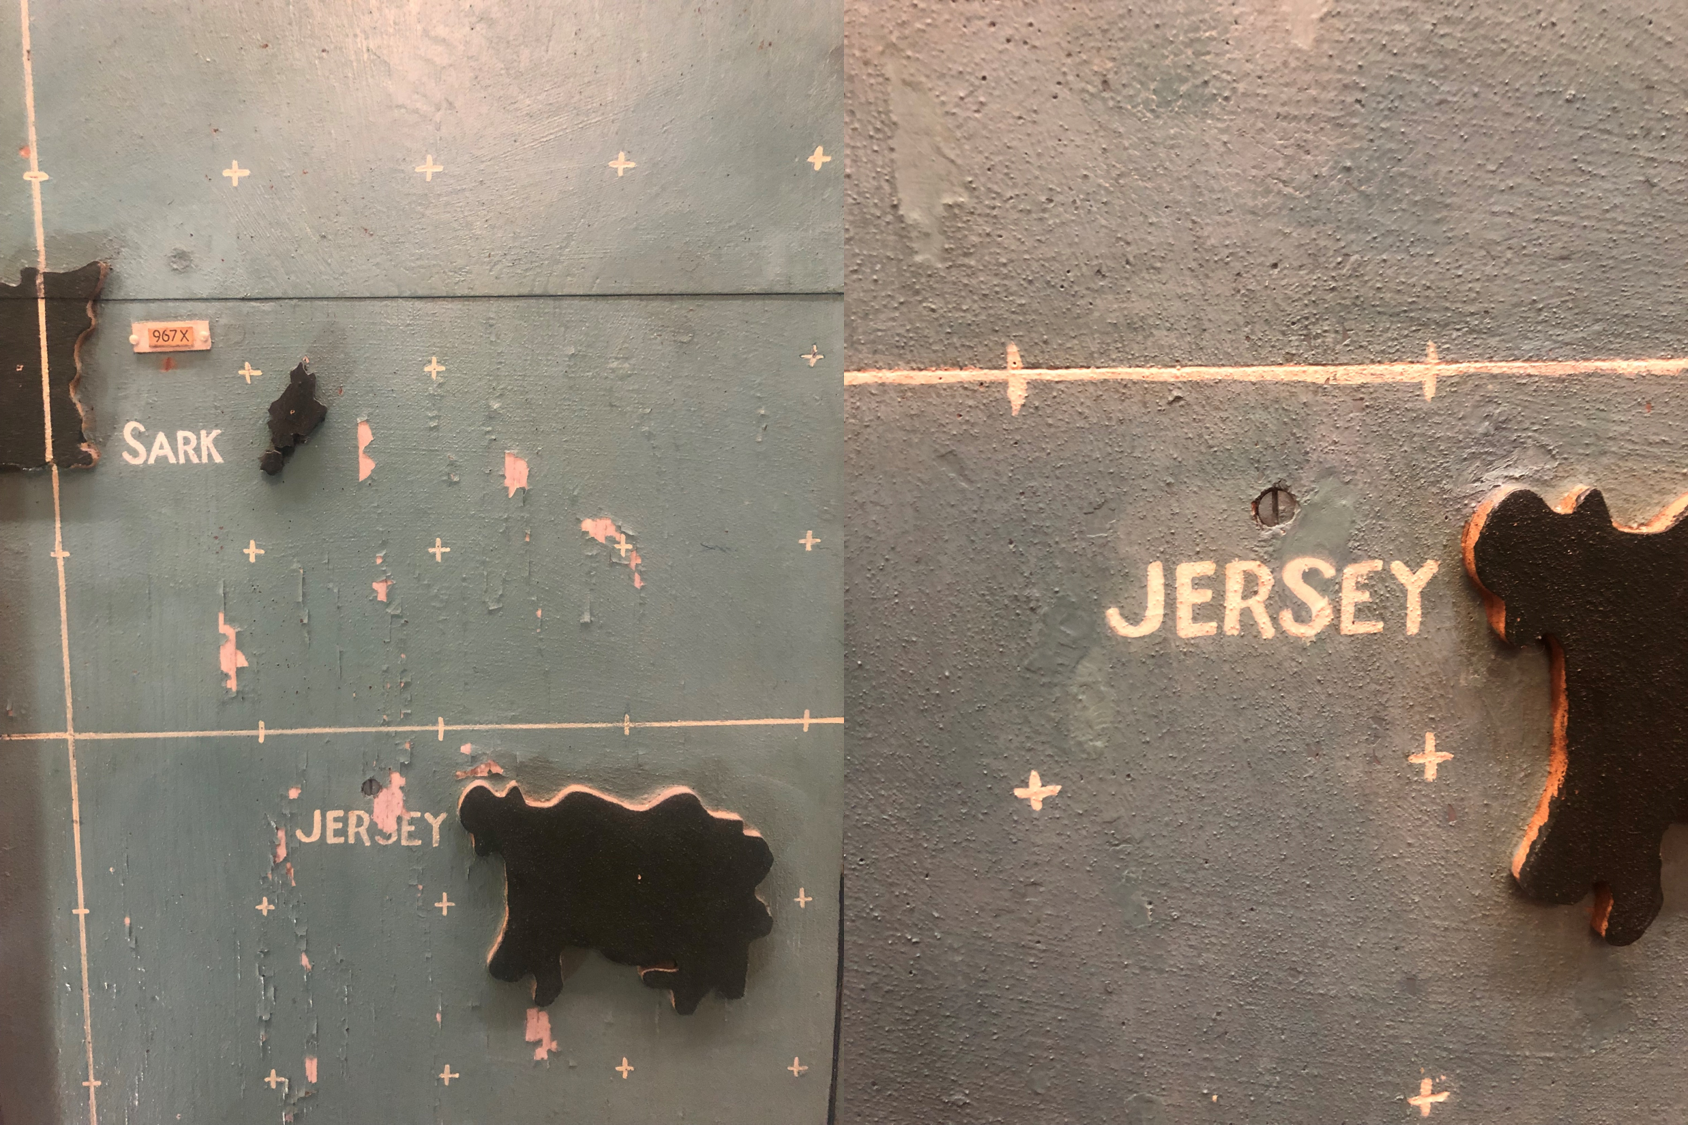 The same section of the D-Day map before and after conservation, showing the conservation work, including sticking back peeling paint